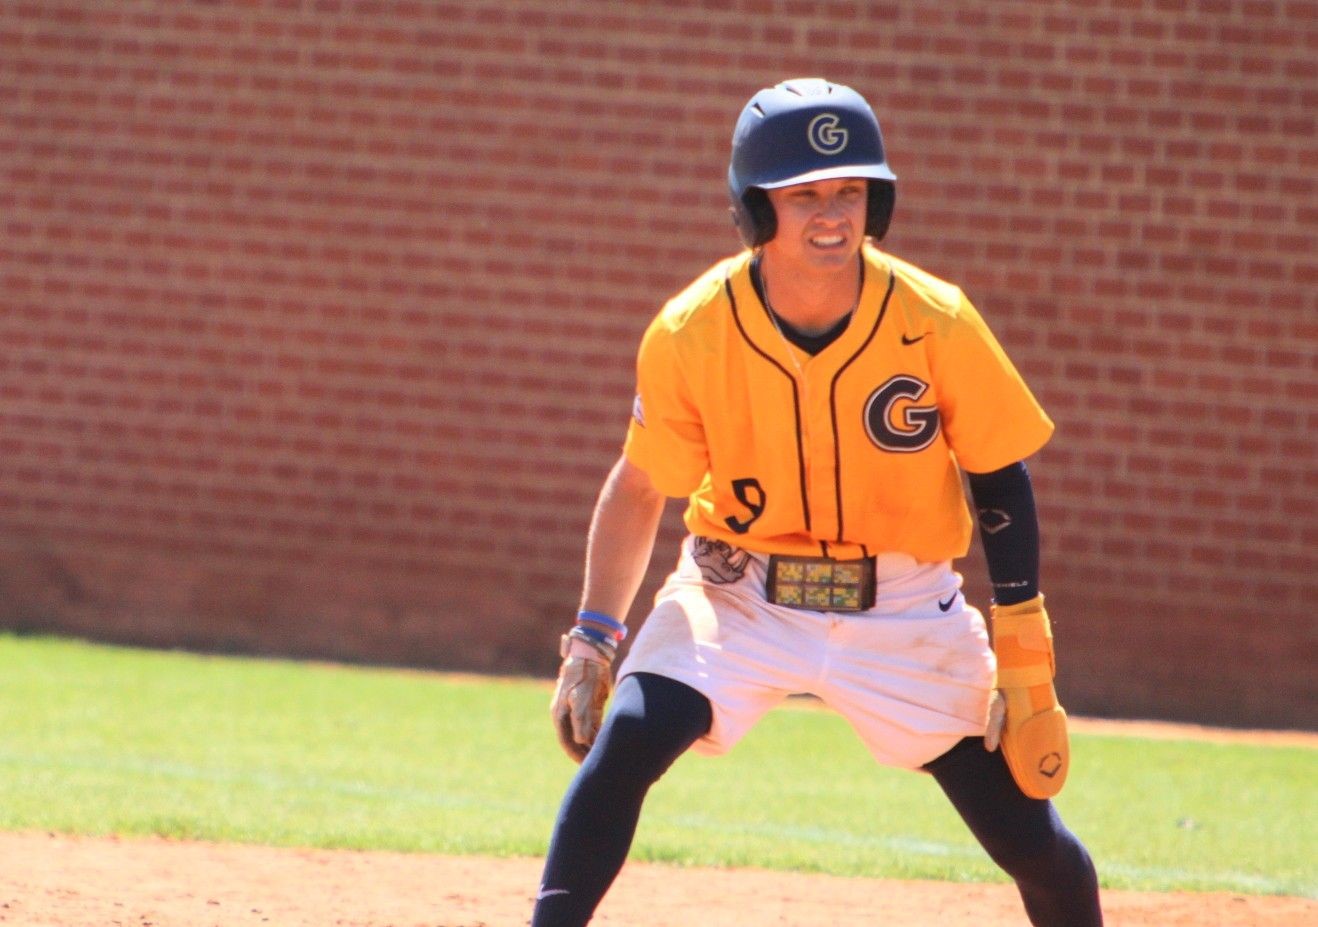 Gaston College's Trent Murchison scored 4 runs and had 3 hits with 3 RBIs in Saturday's doubleheader sweep at Cleveland Community College.